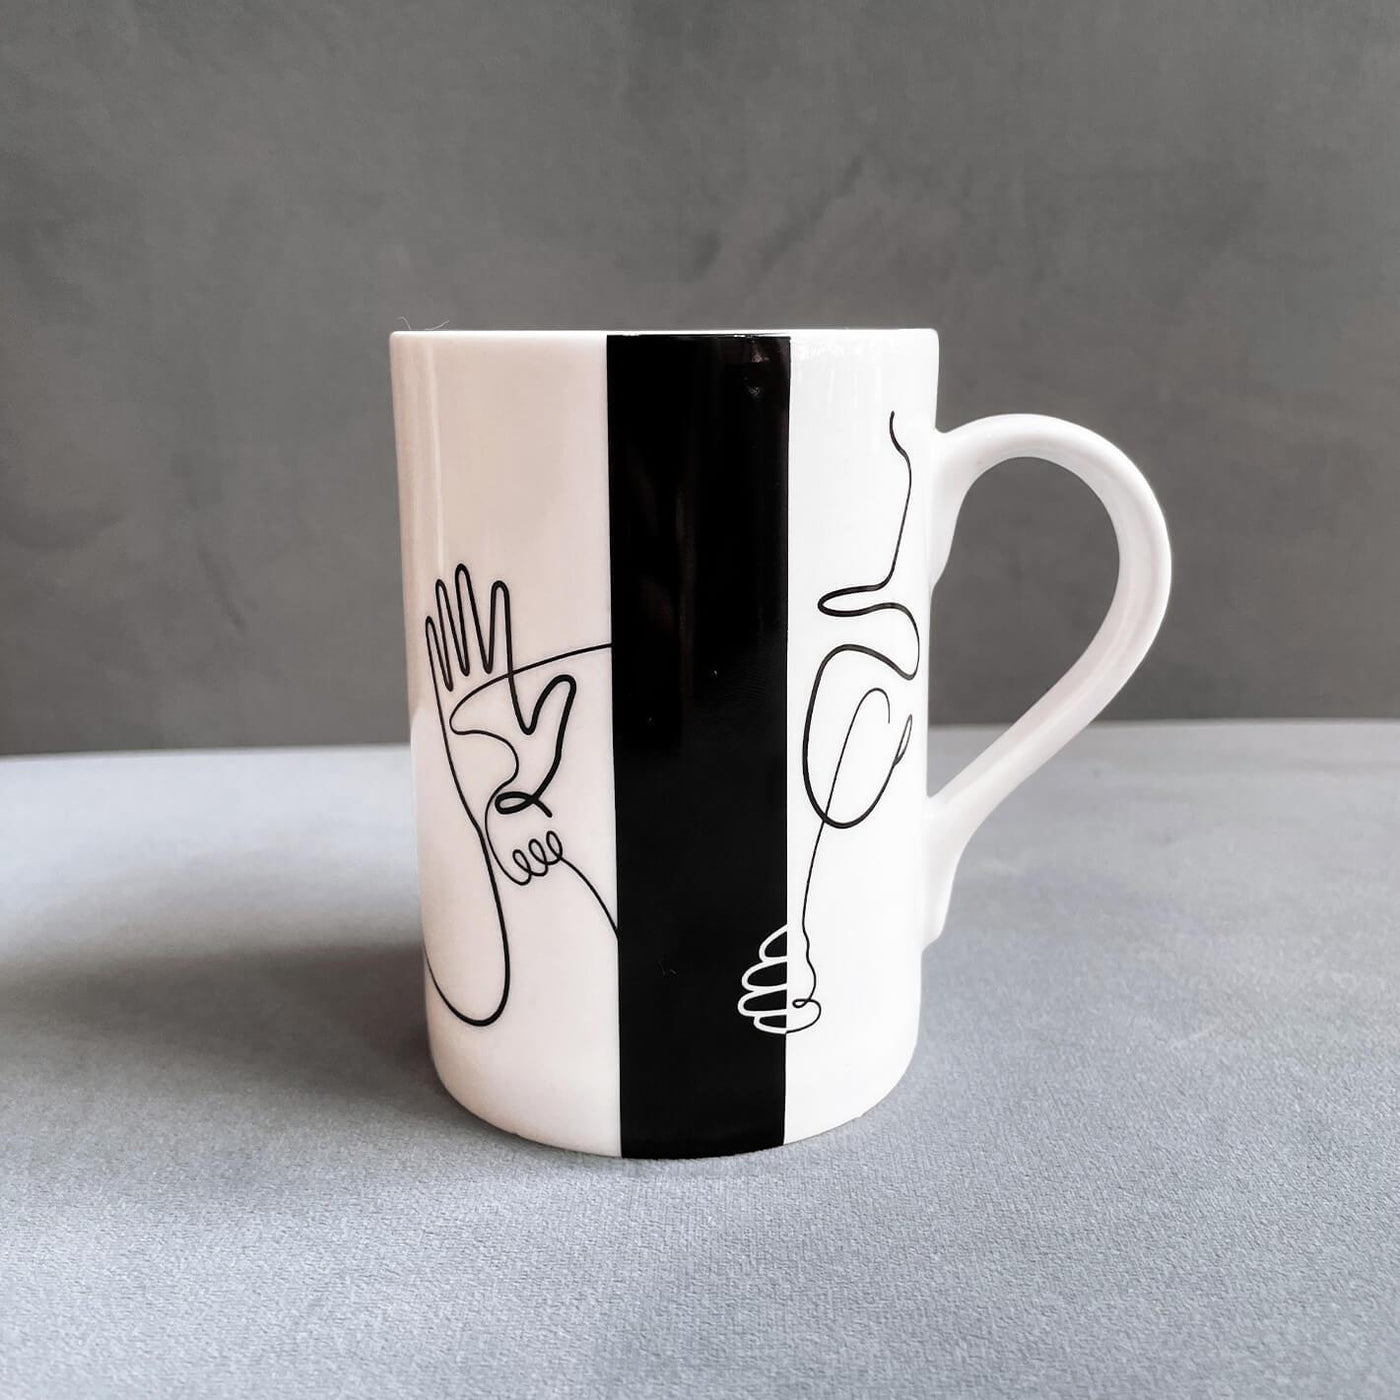 Sneak mug - The Plated Project